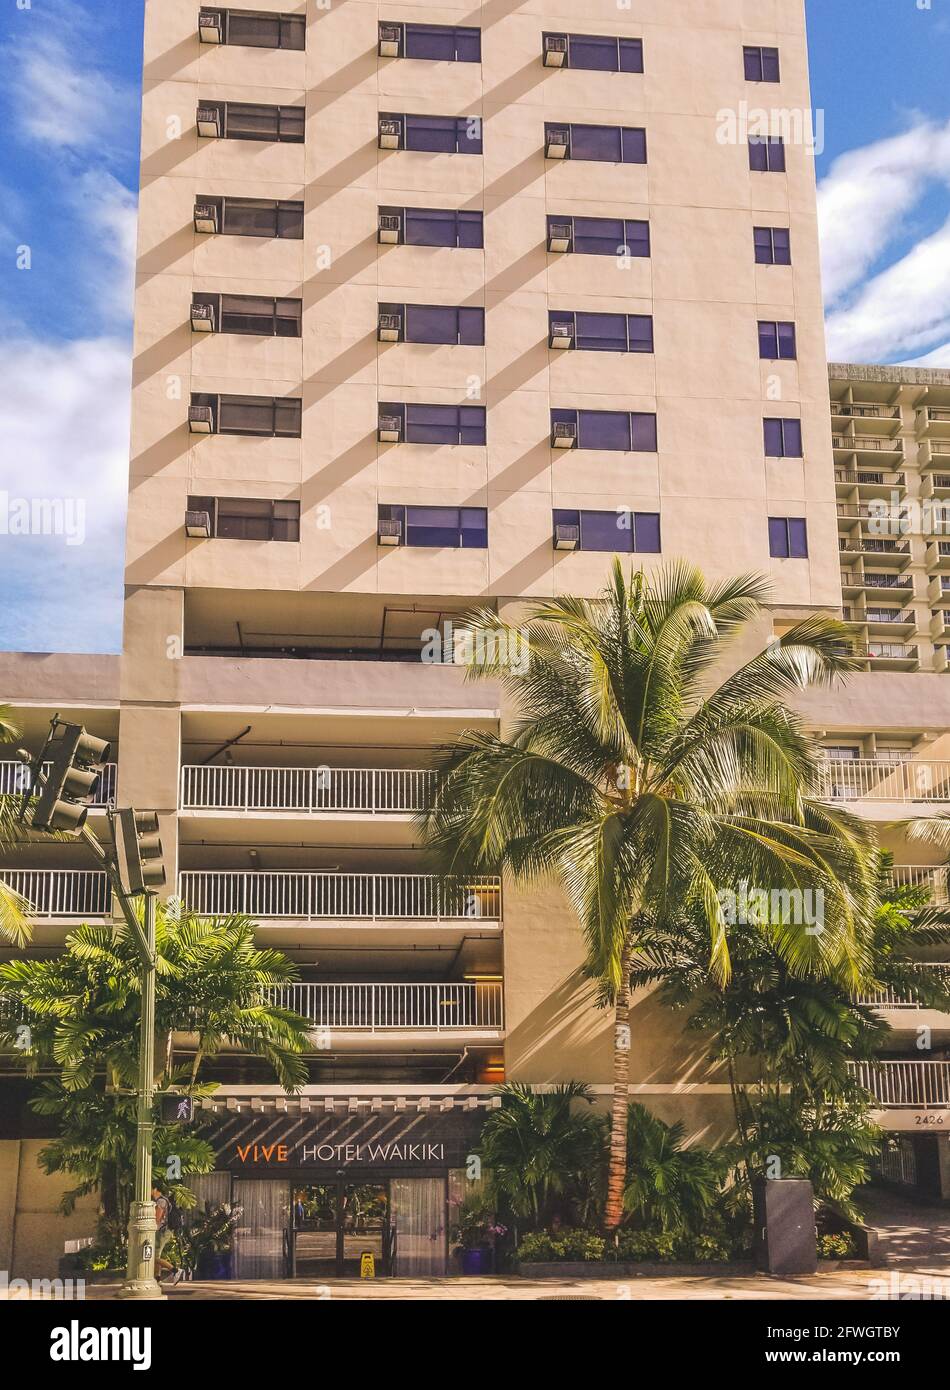 Waikiki Hawaii November 2019: Street view of the Vive Hotel in the afternoon with palm trees vertical Stock Photo